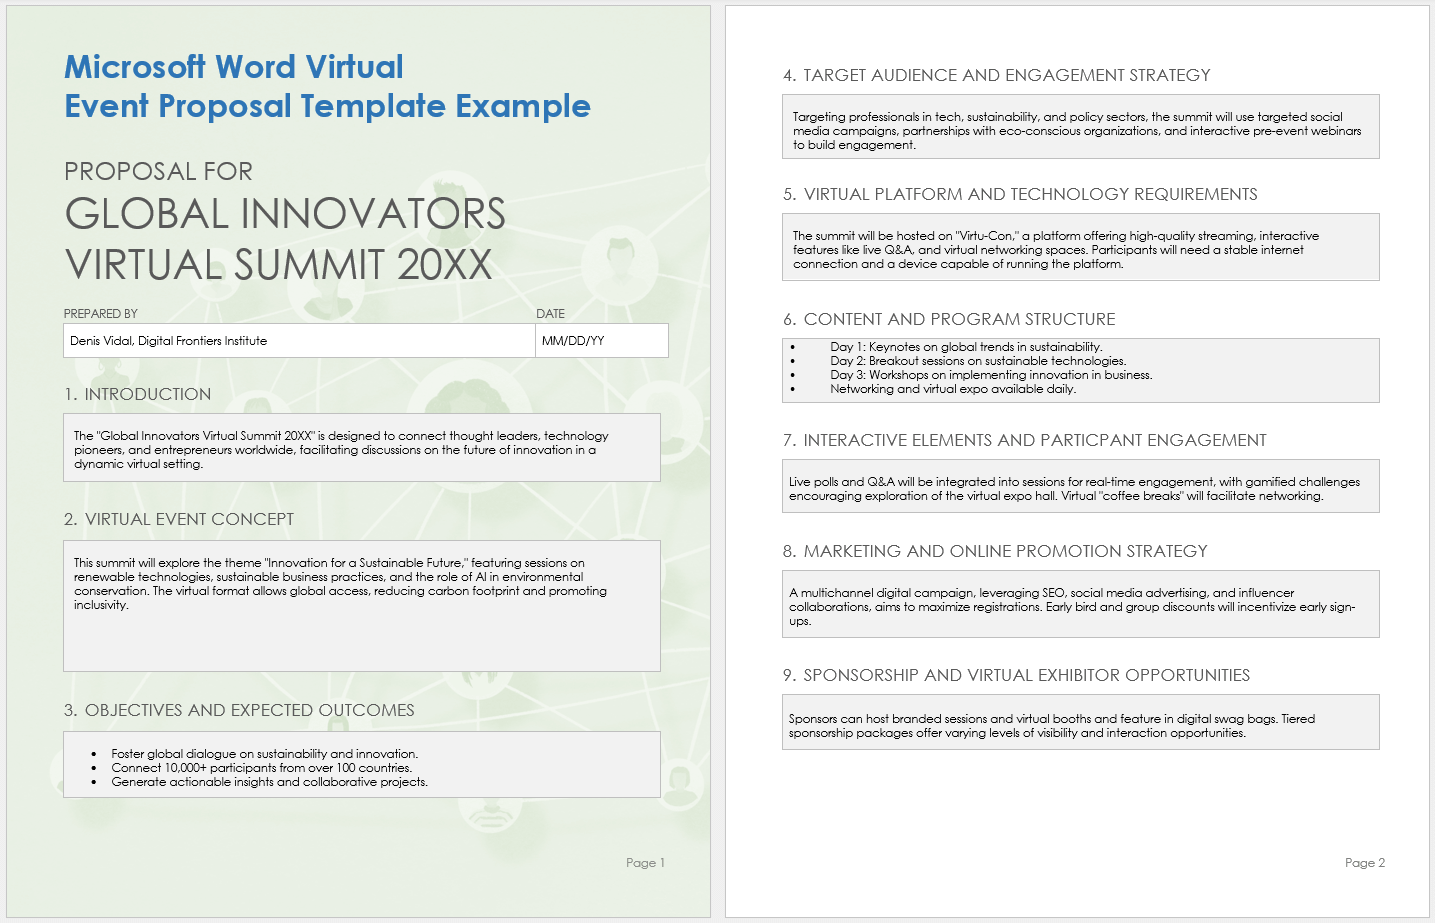 Microsoft Word Virtual Event Proposal Template Example